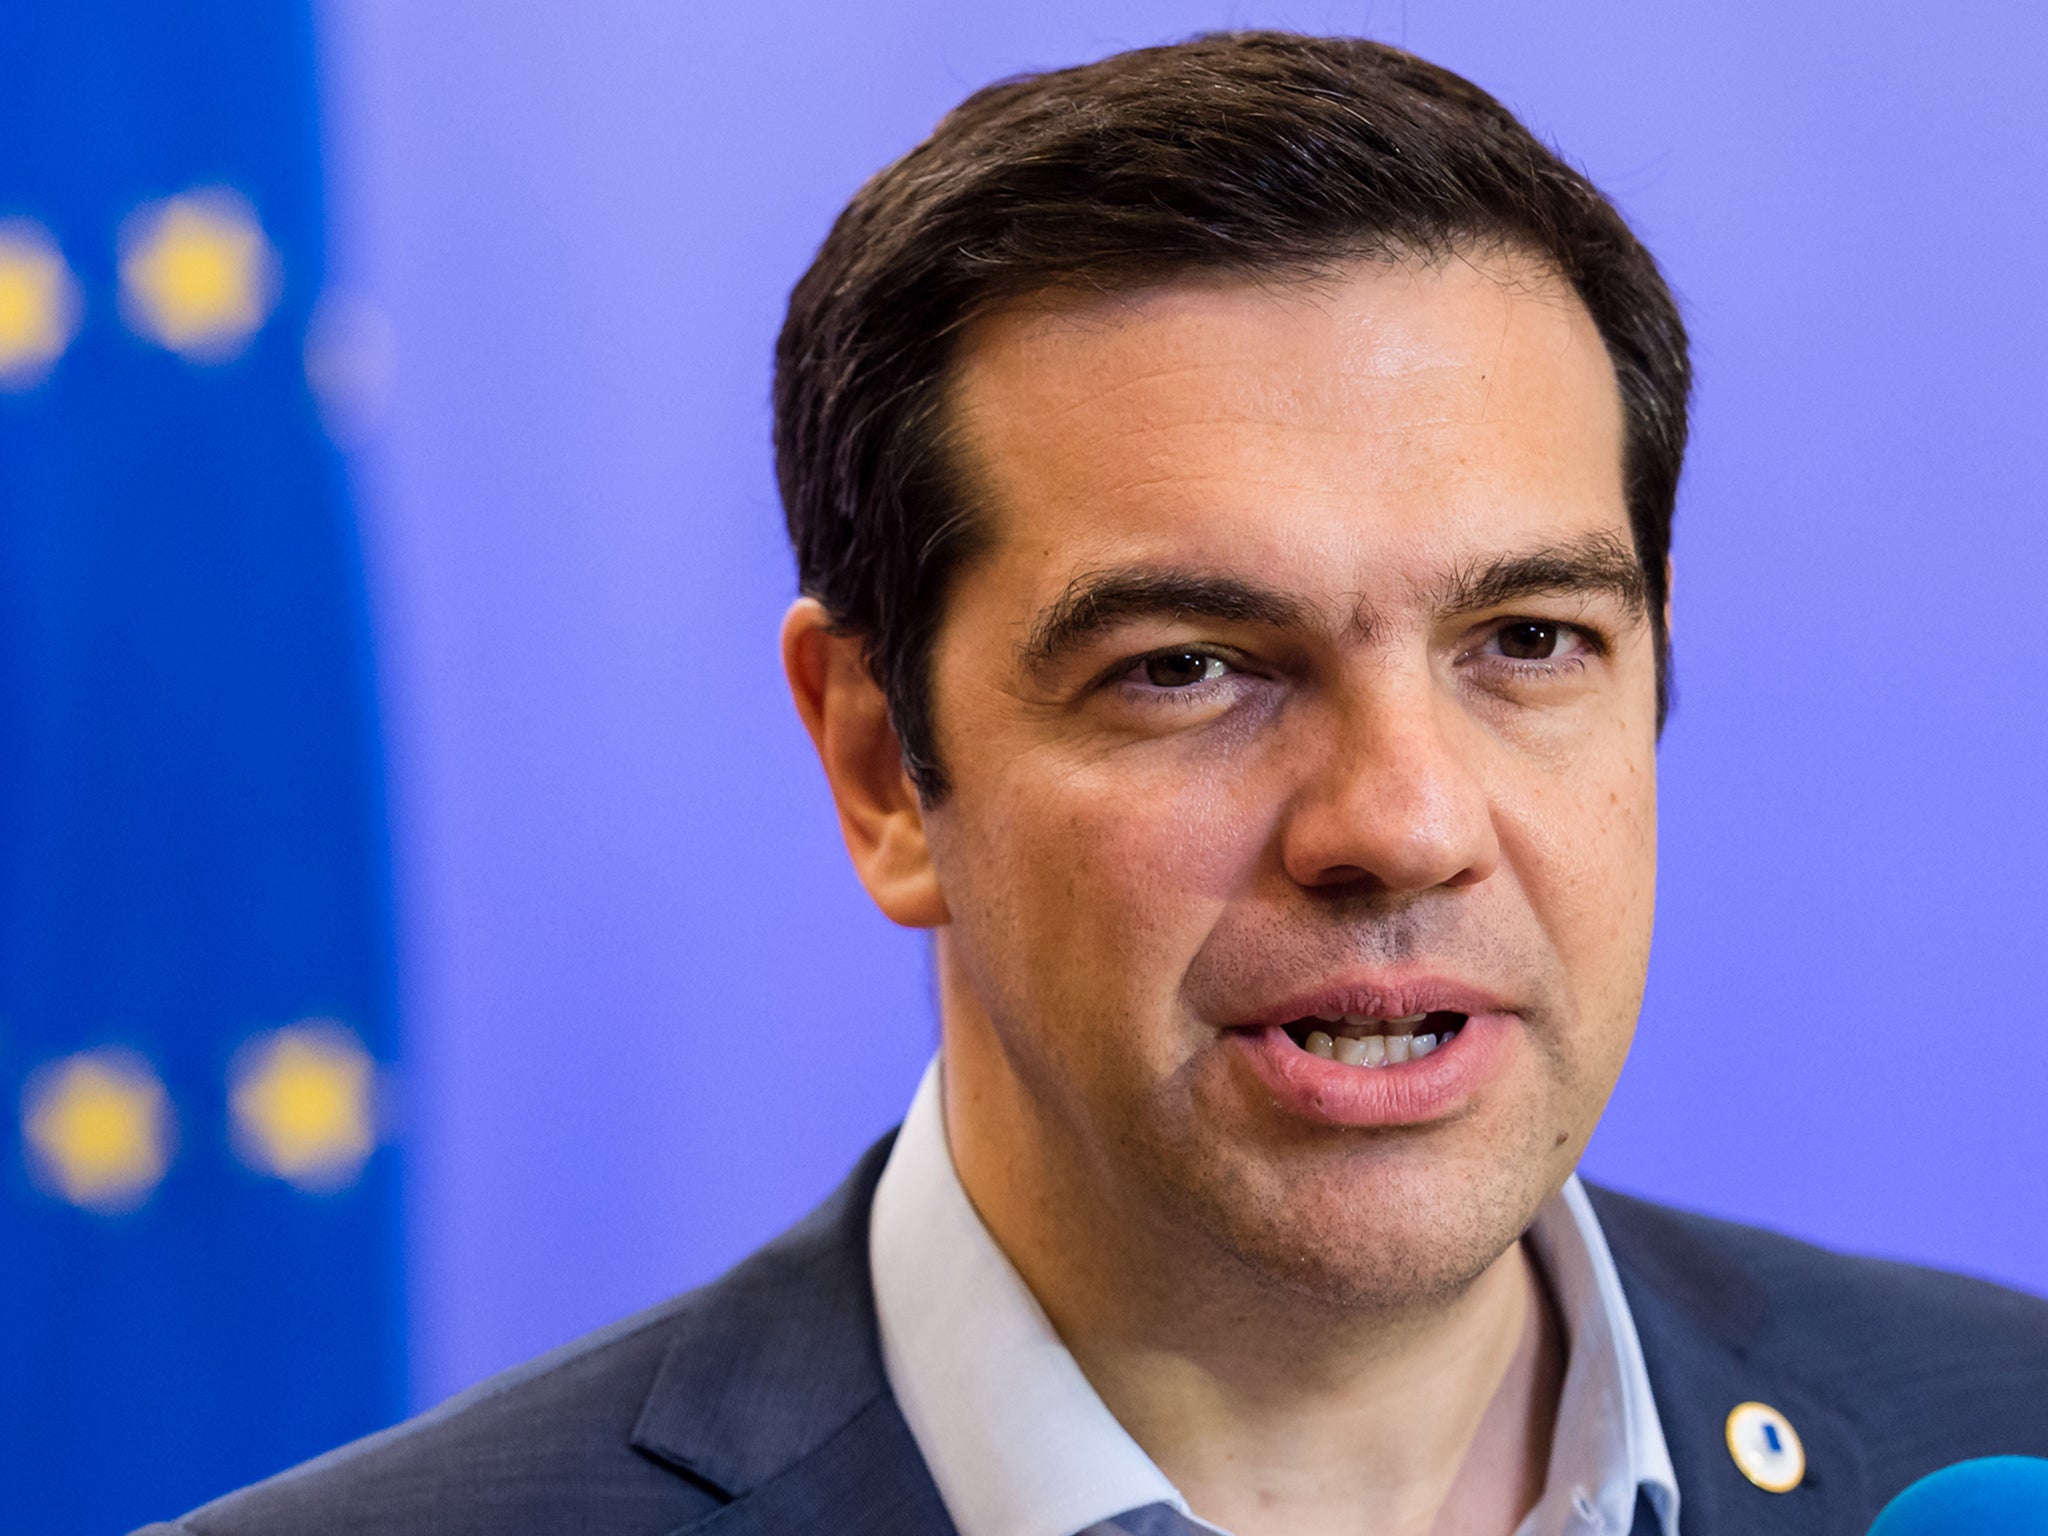 Alexis Tsipras speaks with the media after a meeting of eurozone heads of state at the EU Council building in Brussels